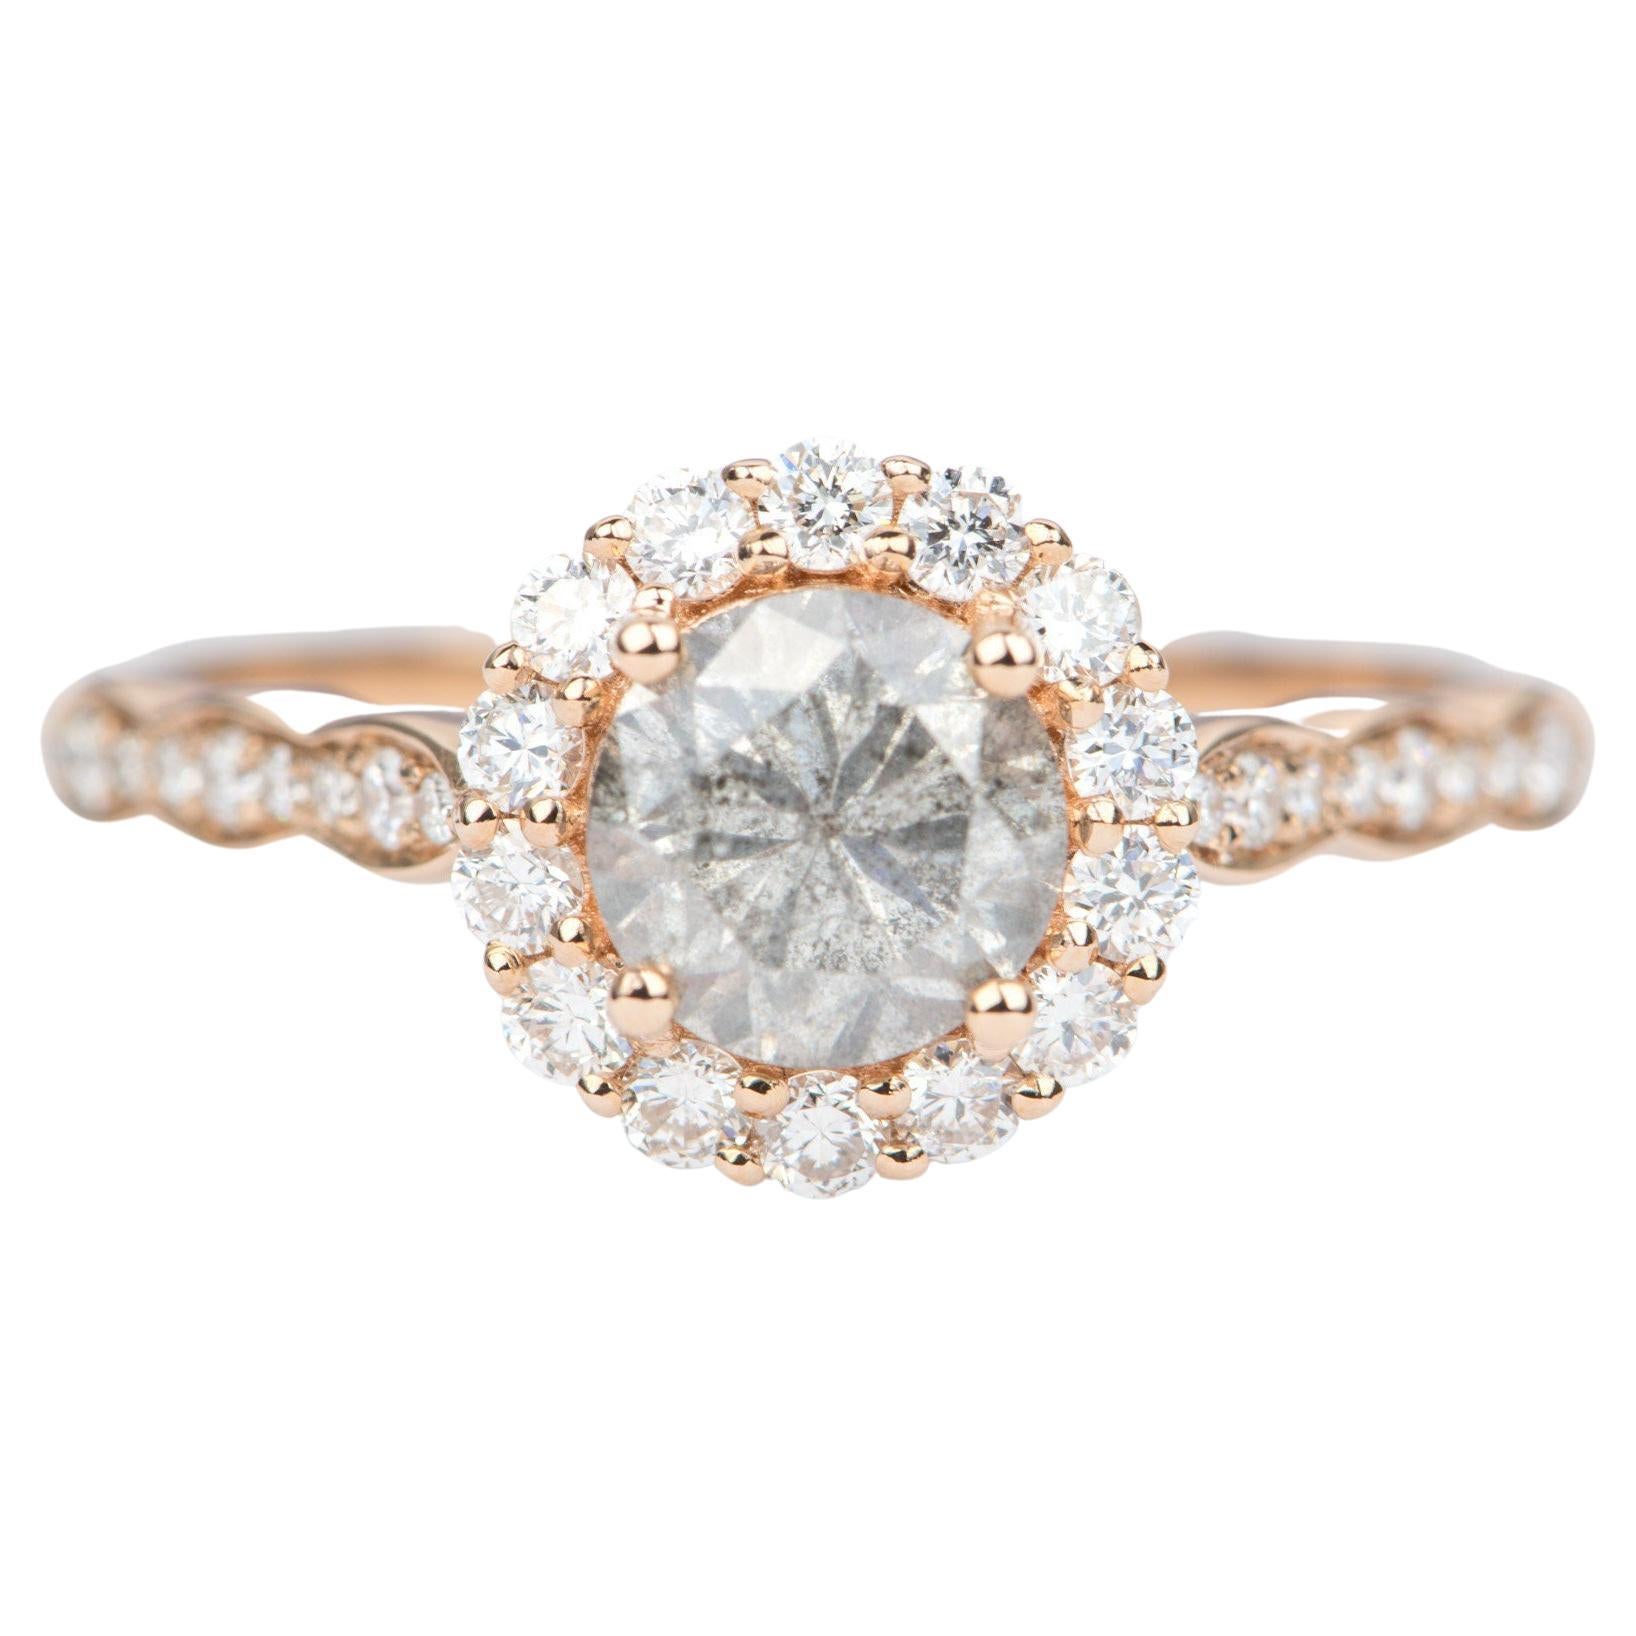 Salt and Pepper Diamond with Brilliant Halo 14K Rose Gold Engagement Ring